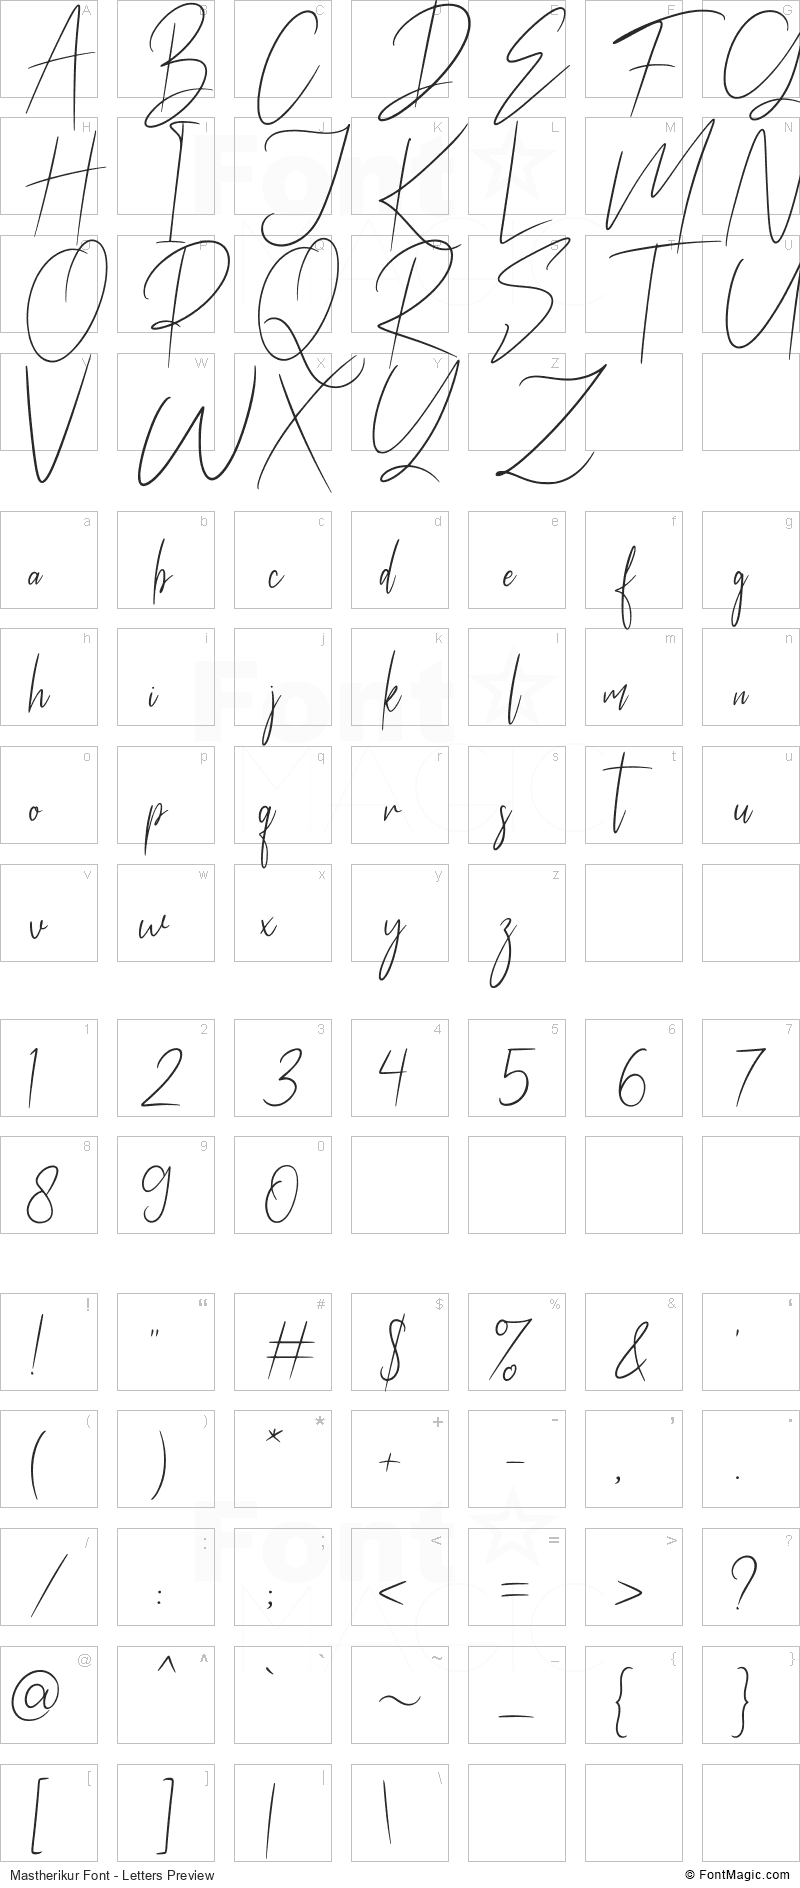 Mastherikur Font - All Latters Preview Chart